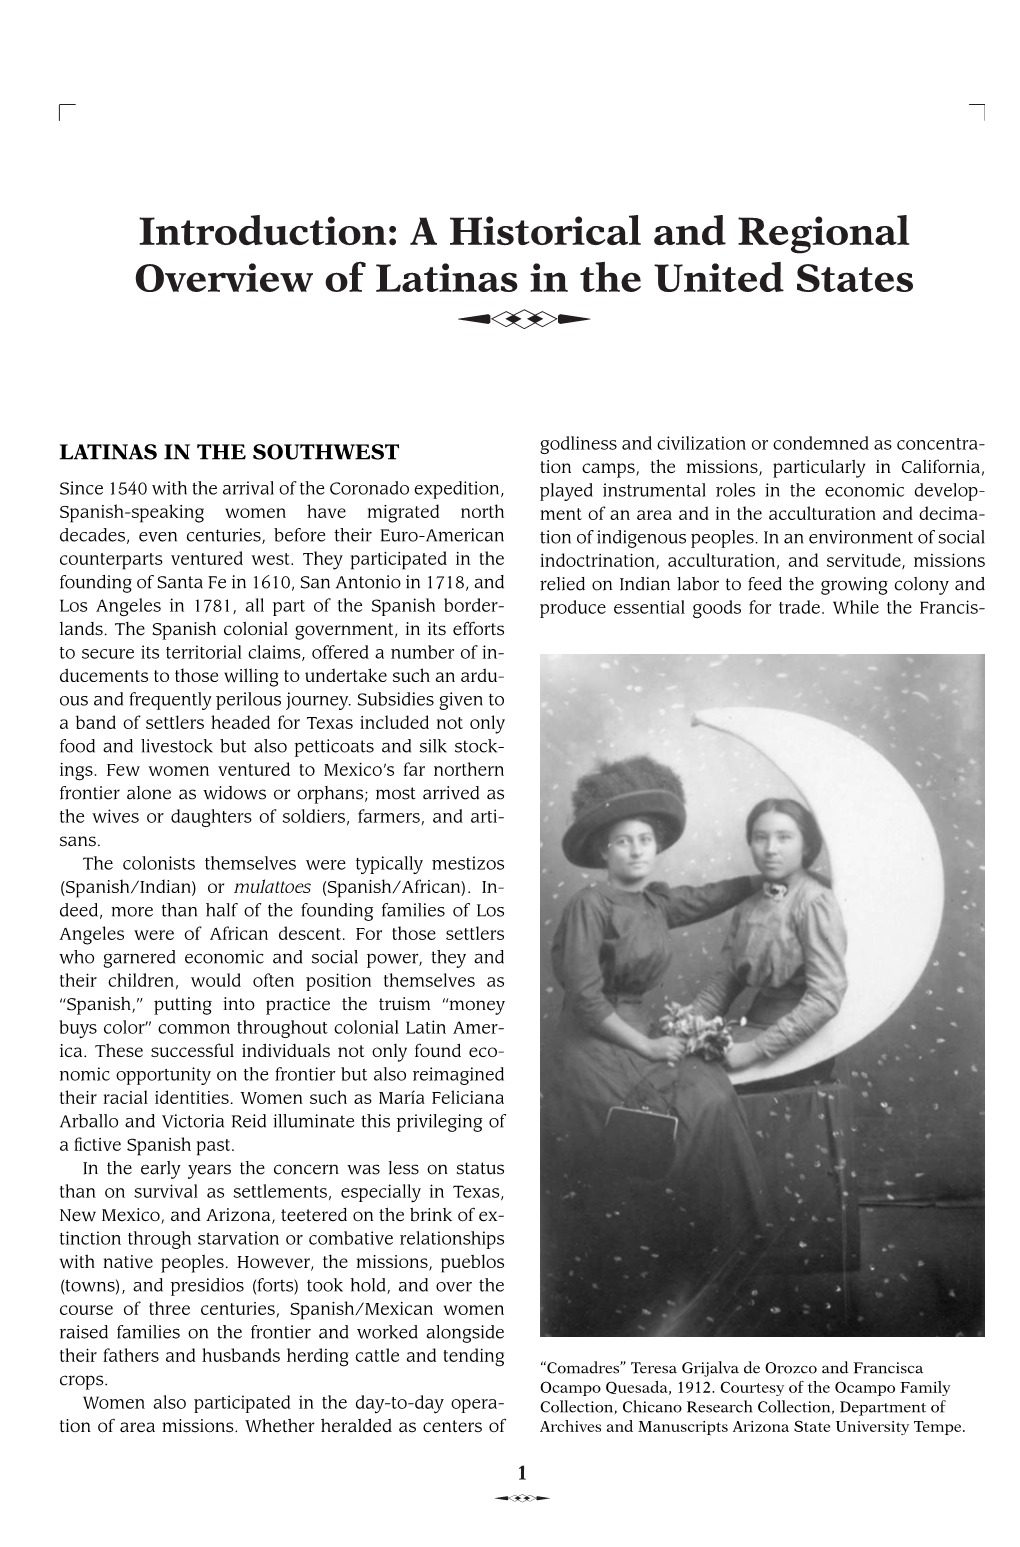 Introduction: a Historical and Regional Overview of Latinas in the United States Q